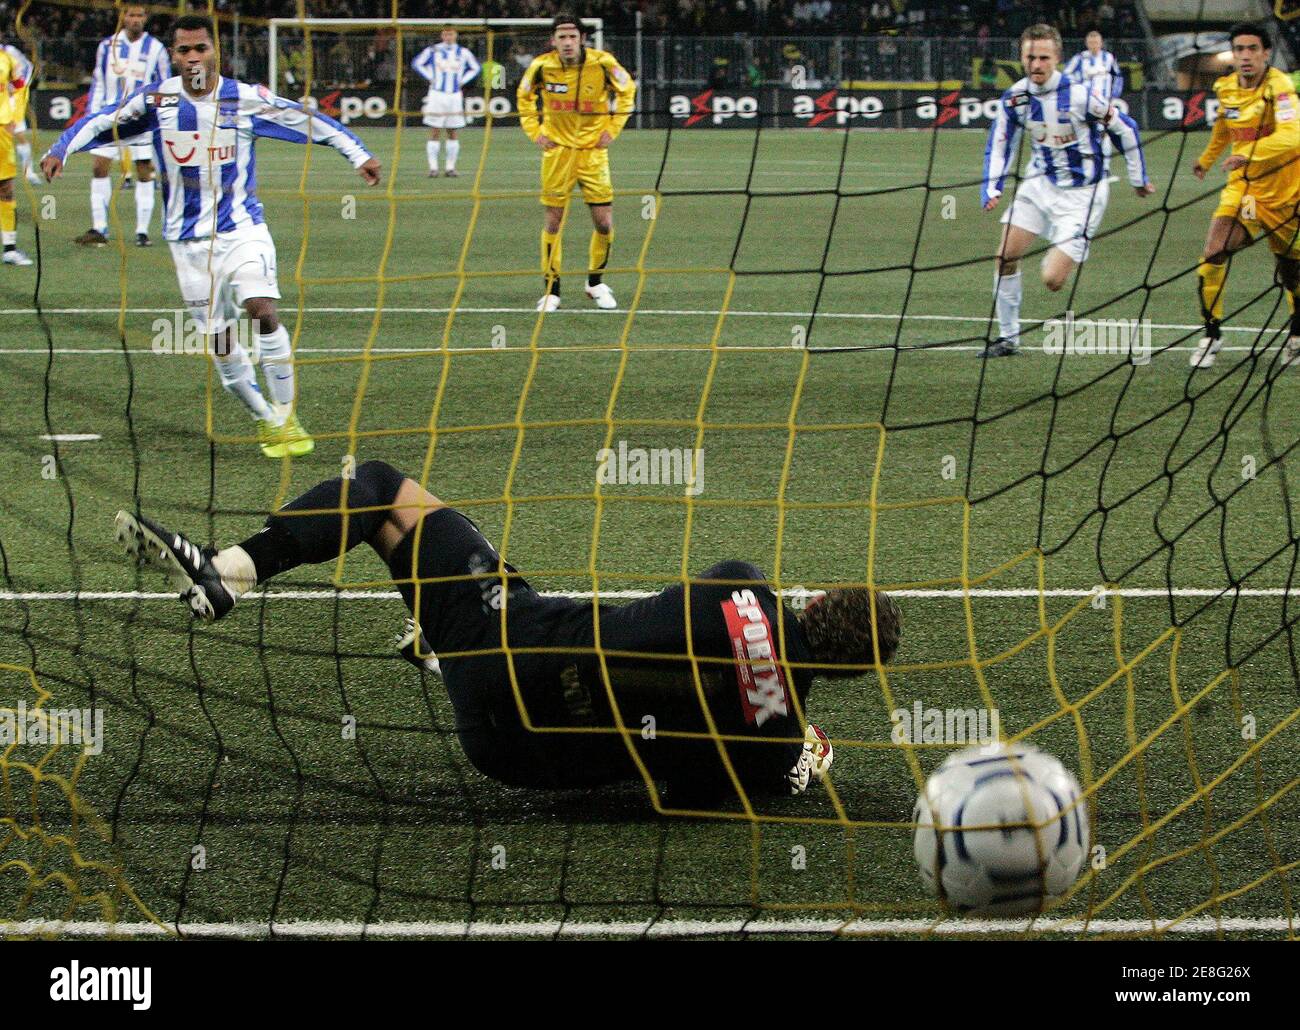 FC Zurich's Raffael scores the first goal against BSC Young Boys' (YB) goalkeeper Marco Woelfli during their Super League soccer match in Bern November 11, 2007. REUTERS/Pascal Lauener (SWITZERLAND) Stock Photo